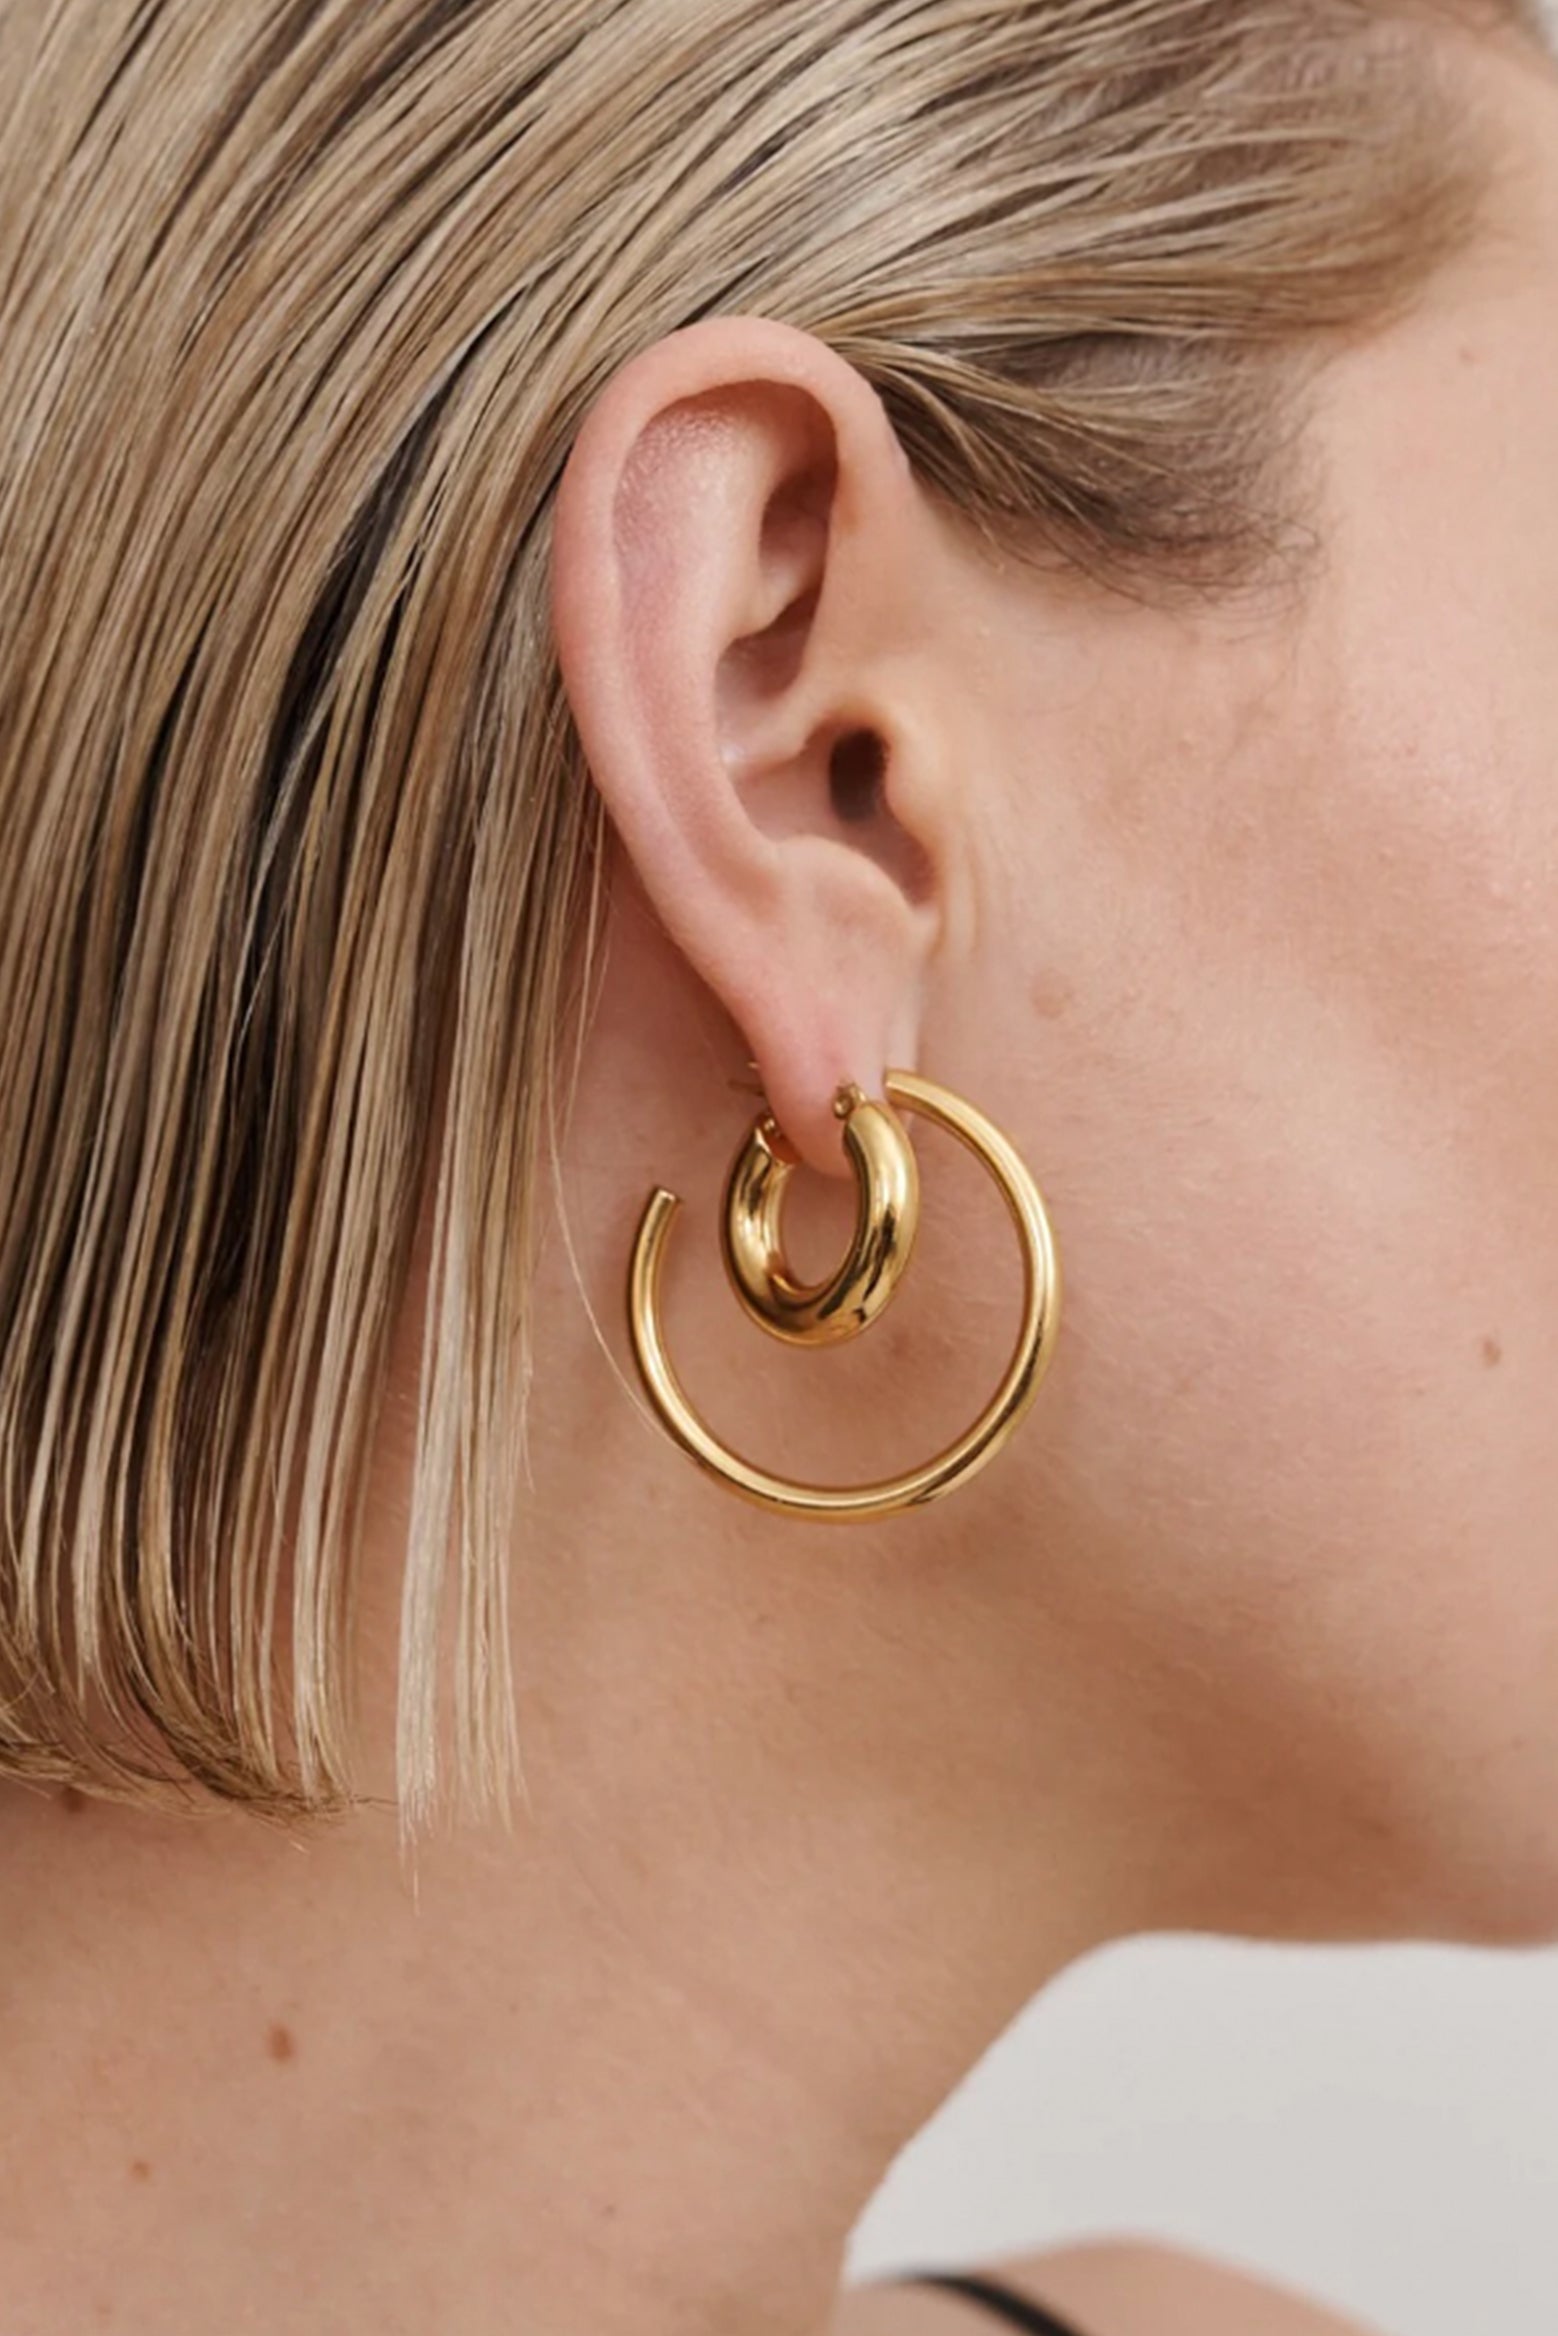 Anna Rossi Everyday Hoop in Gold available at The New Trend Australia.